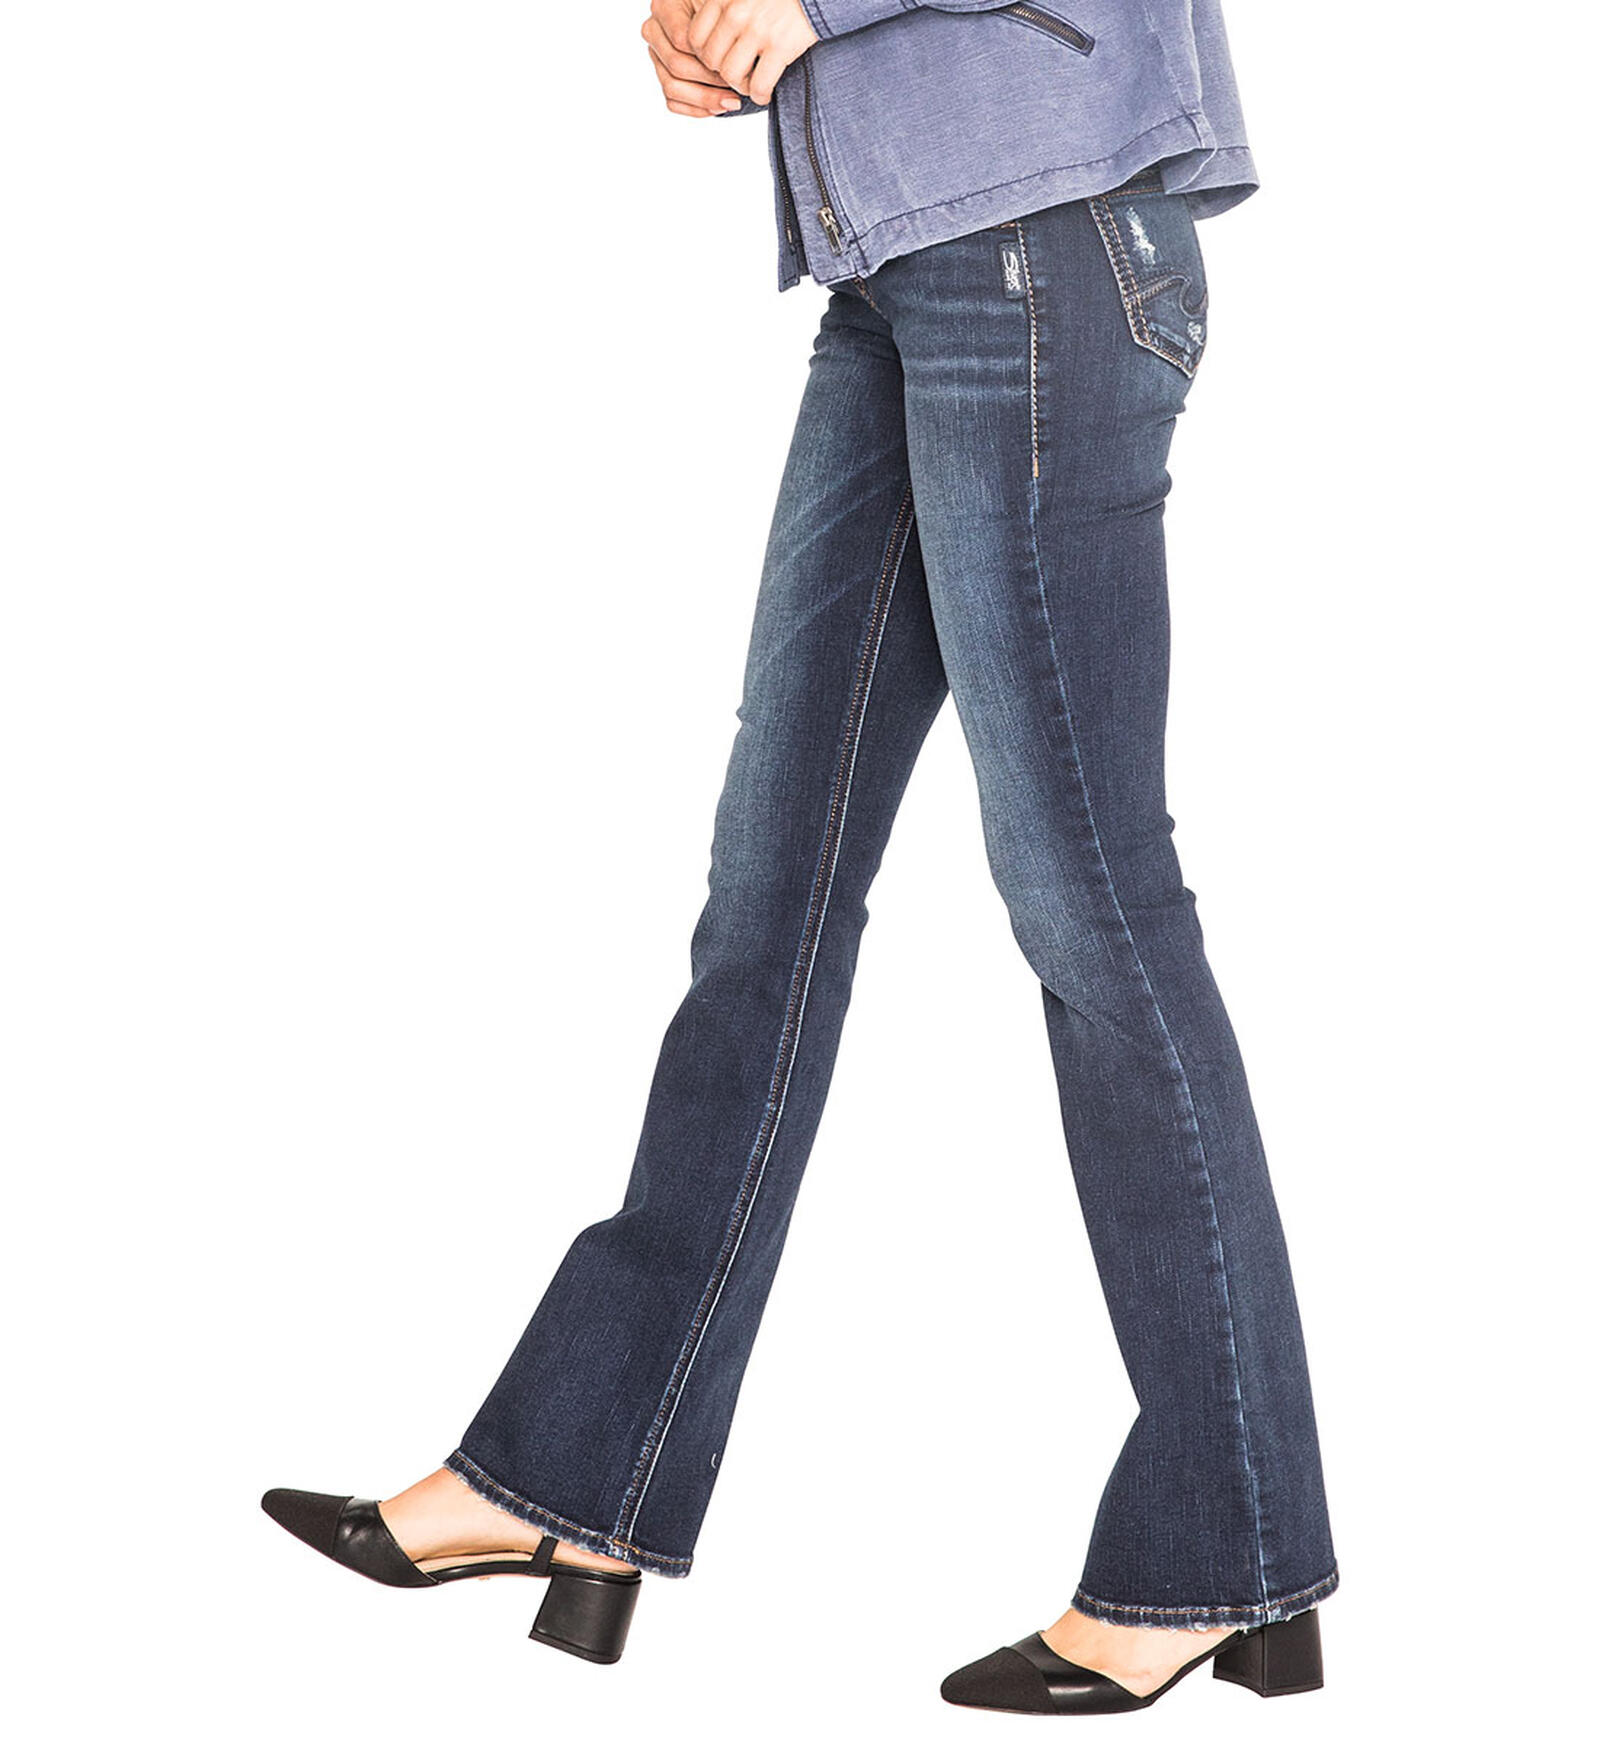 89.00 Bootcut Jeans Suki Dark Wash New USD for Silver US | Buy